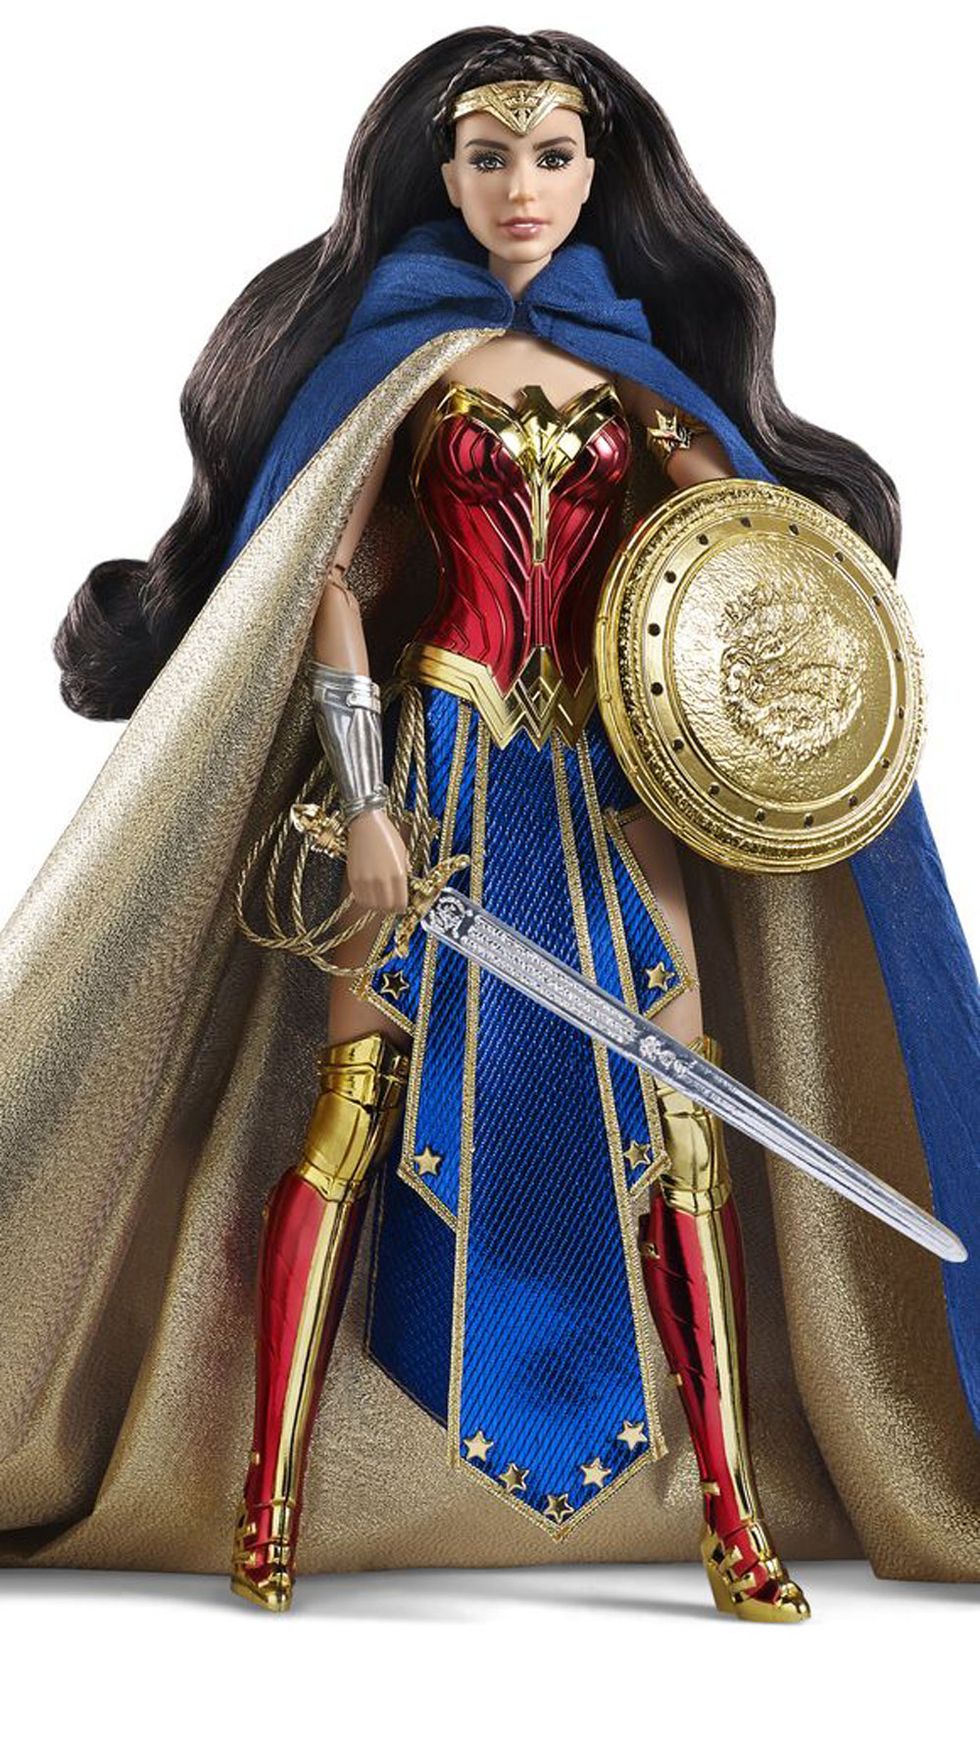 Toy, Fictional character, Costume design, Cloak, Long hair, Costume, Costume accessory, Sculpture, Brass, Action figure, 